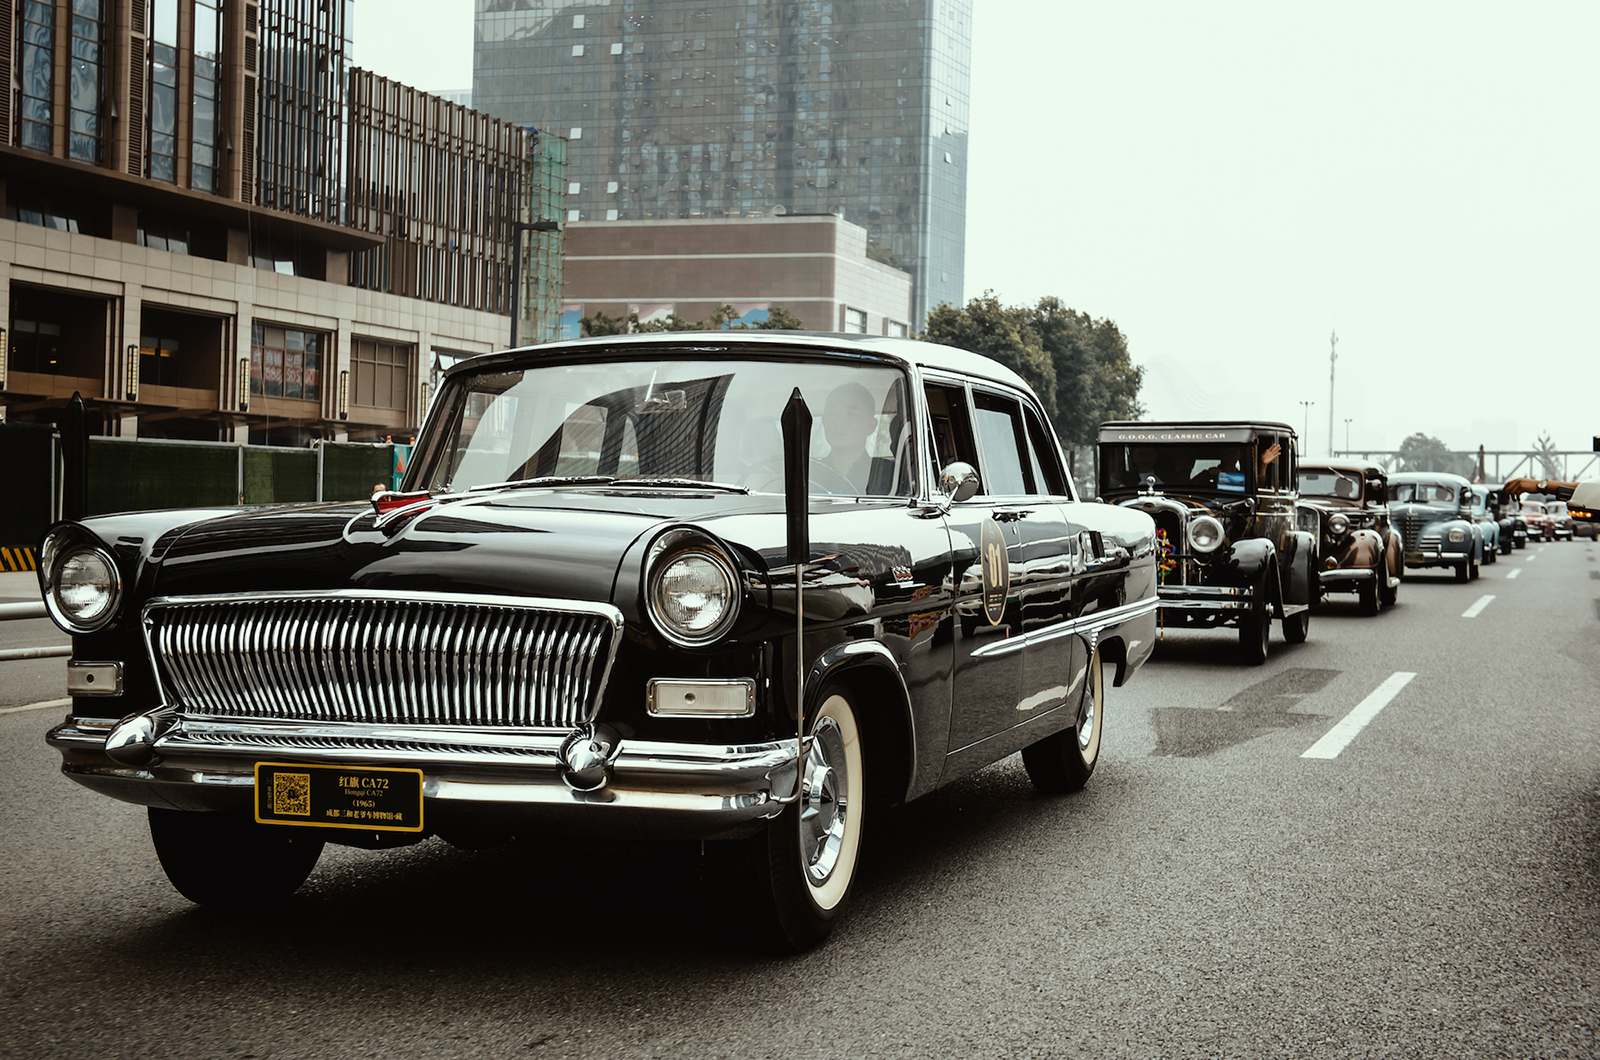 Classic & Sports Car – Why China’s booming classic car interest is great news